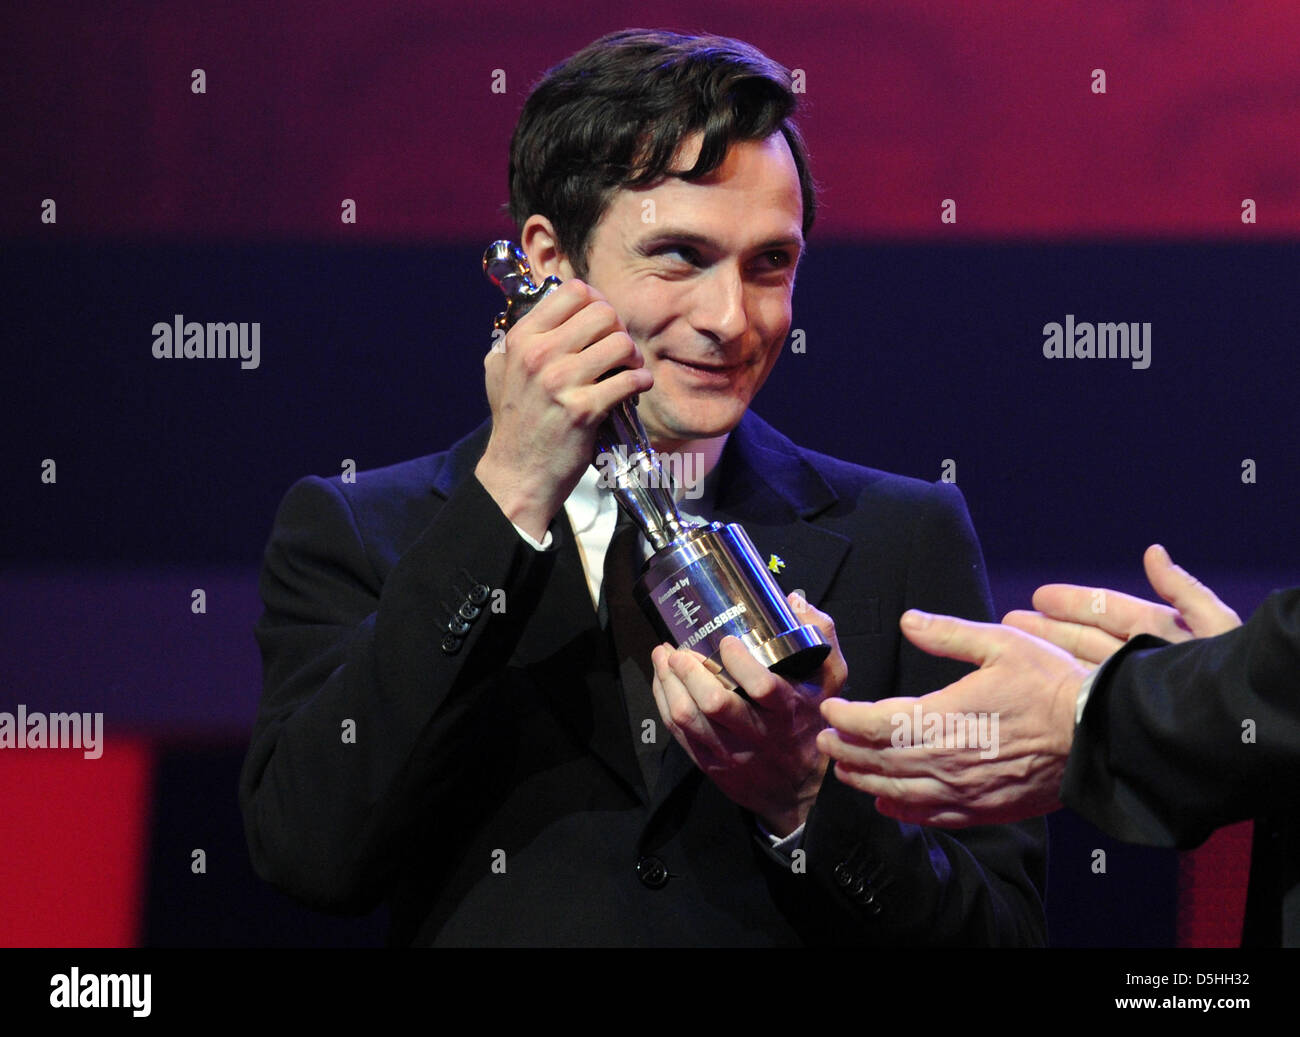 Edward Hogg (United Kingdom) receives Shooting Star trophy 2010 during the award ceremony at the 60th Berlinale International Film Festival in Berlin, Germany, on Monday, 15 February 2010. The festival runs until 21 Febuary 2010. Photo: Marcus Brandt dpa/lbn  +++(c) dpa - Bildfunk+++ Stock Photo